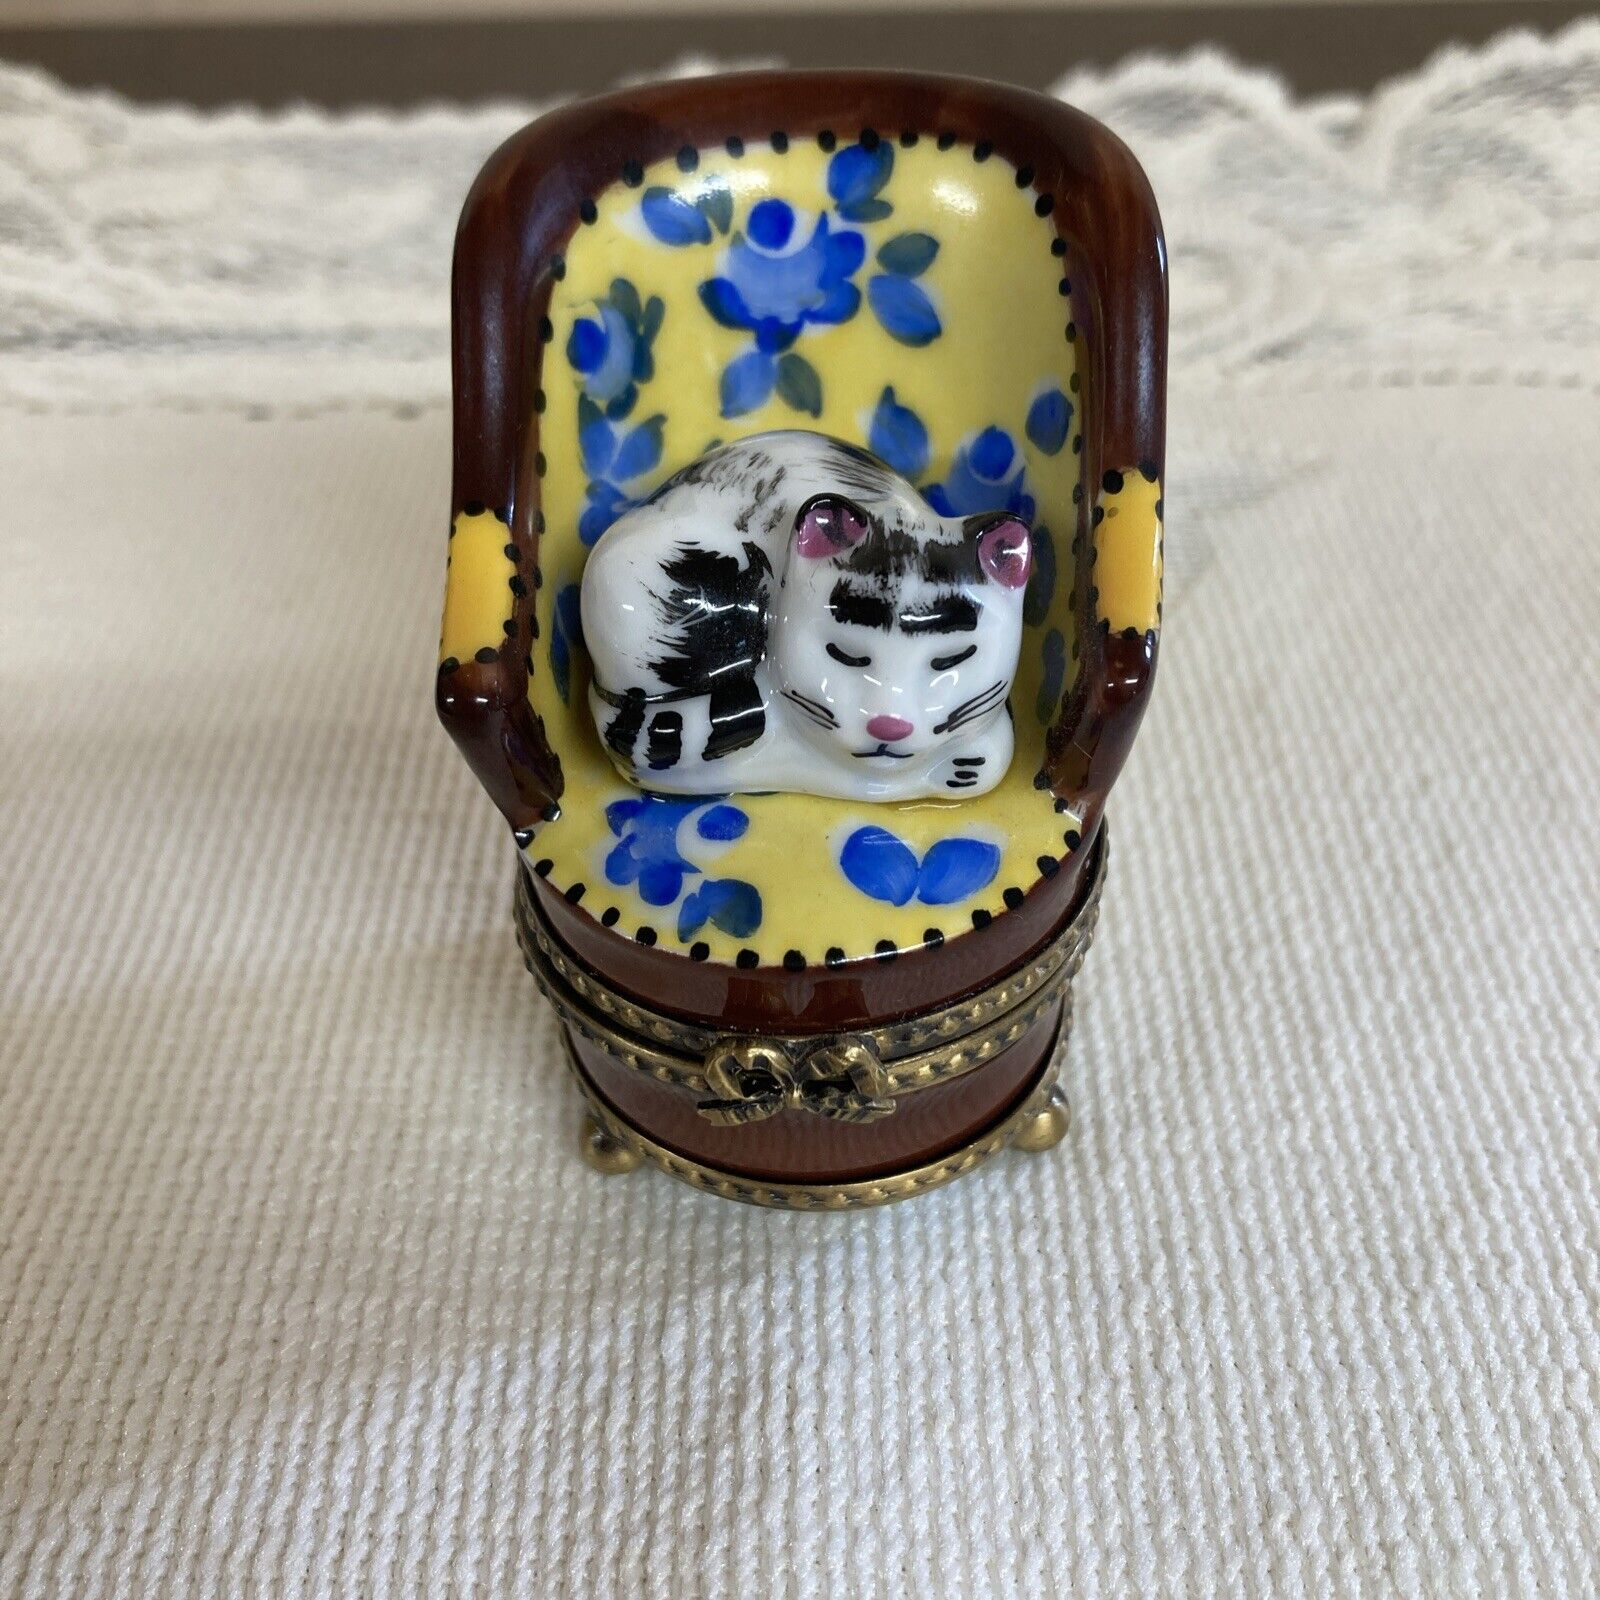 LIMOGES PEINT MAIN CAT ON YELLOW CHAIR TRINKET BOX ~SIGNED GR~